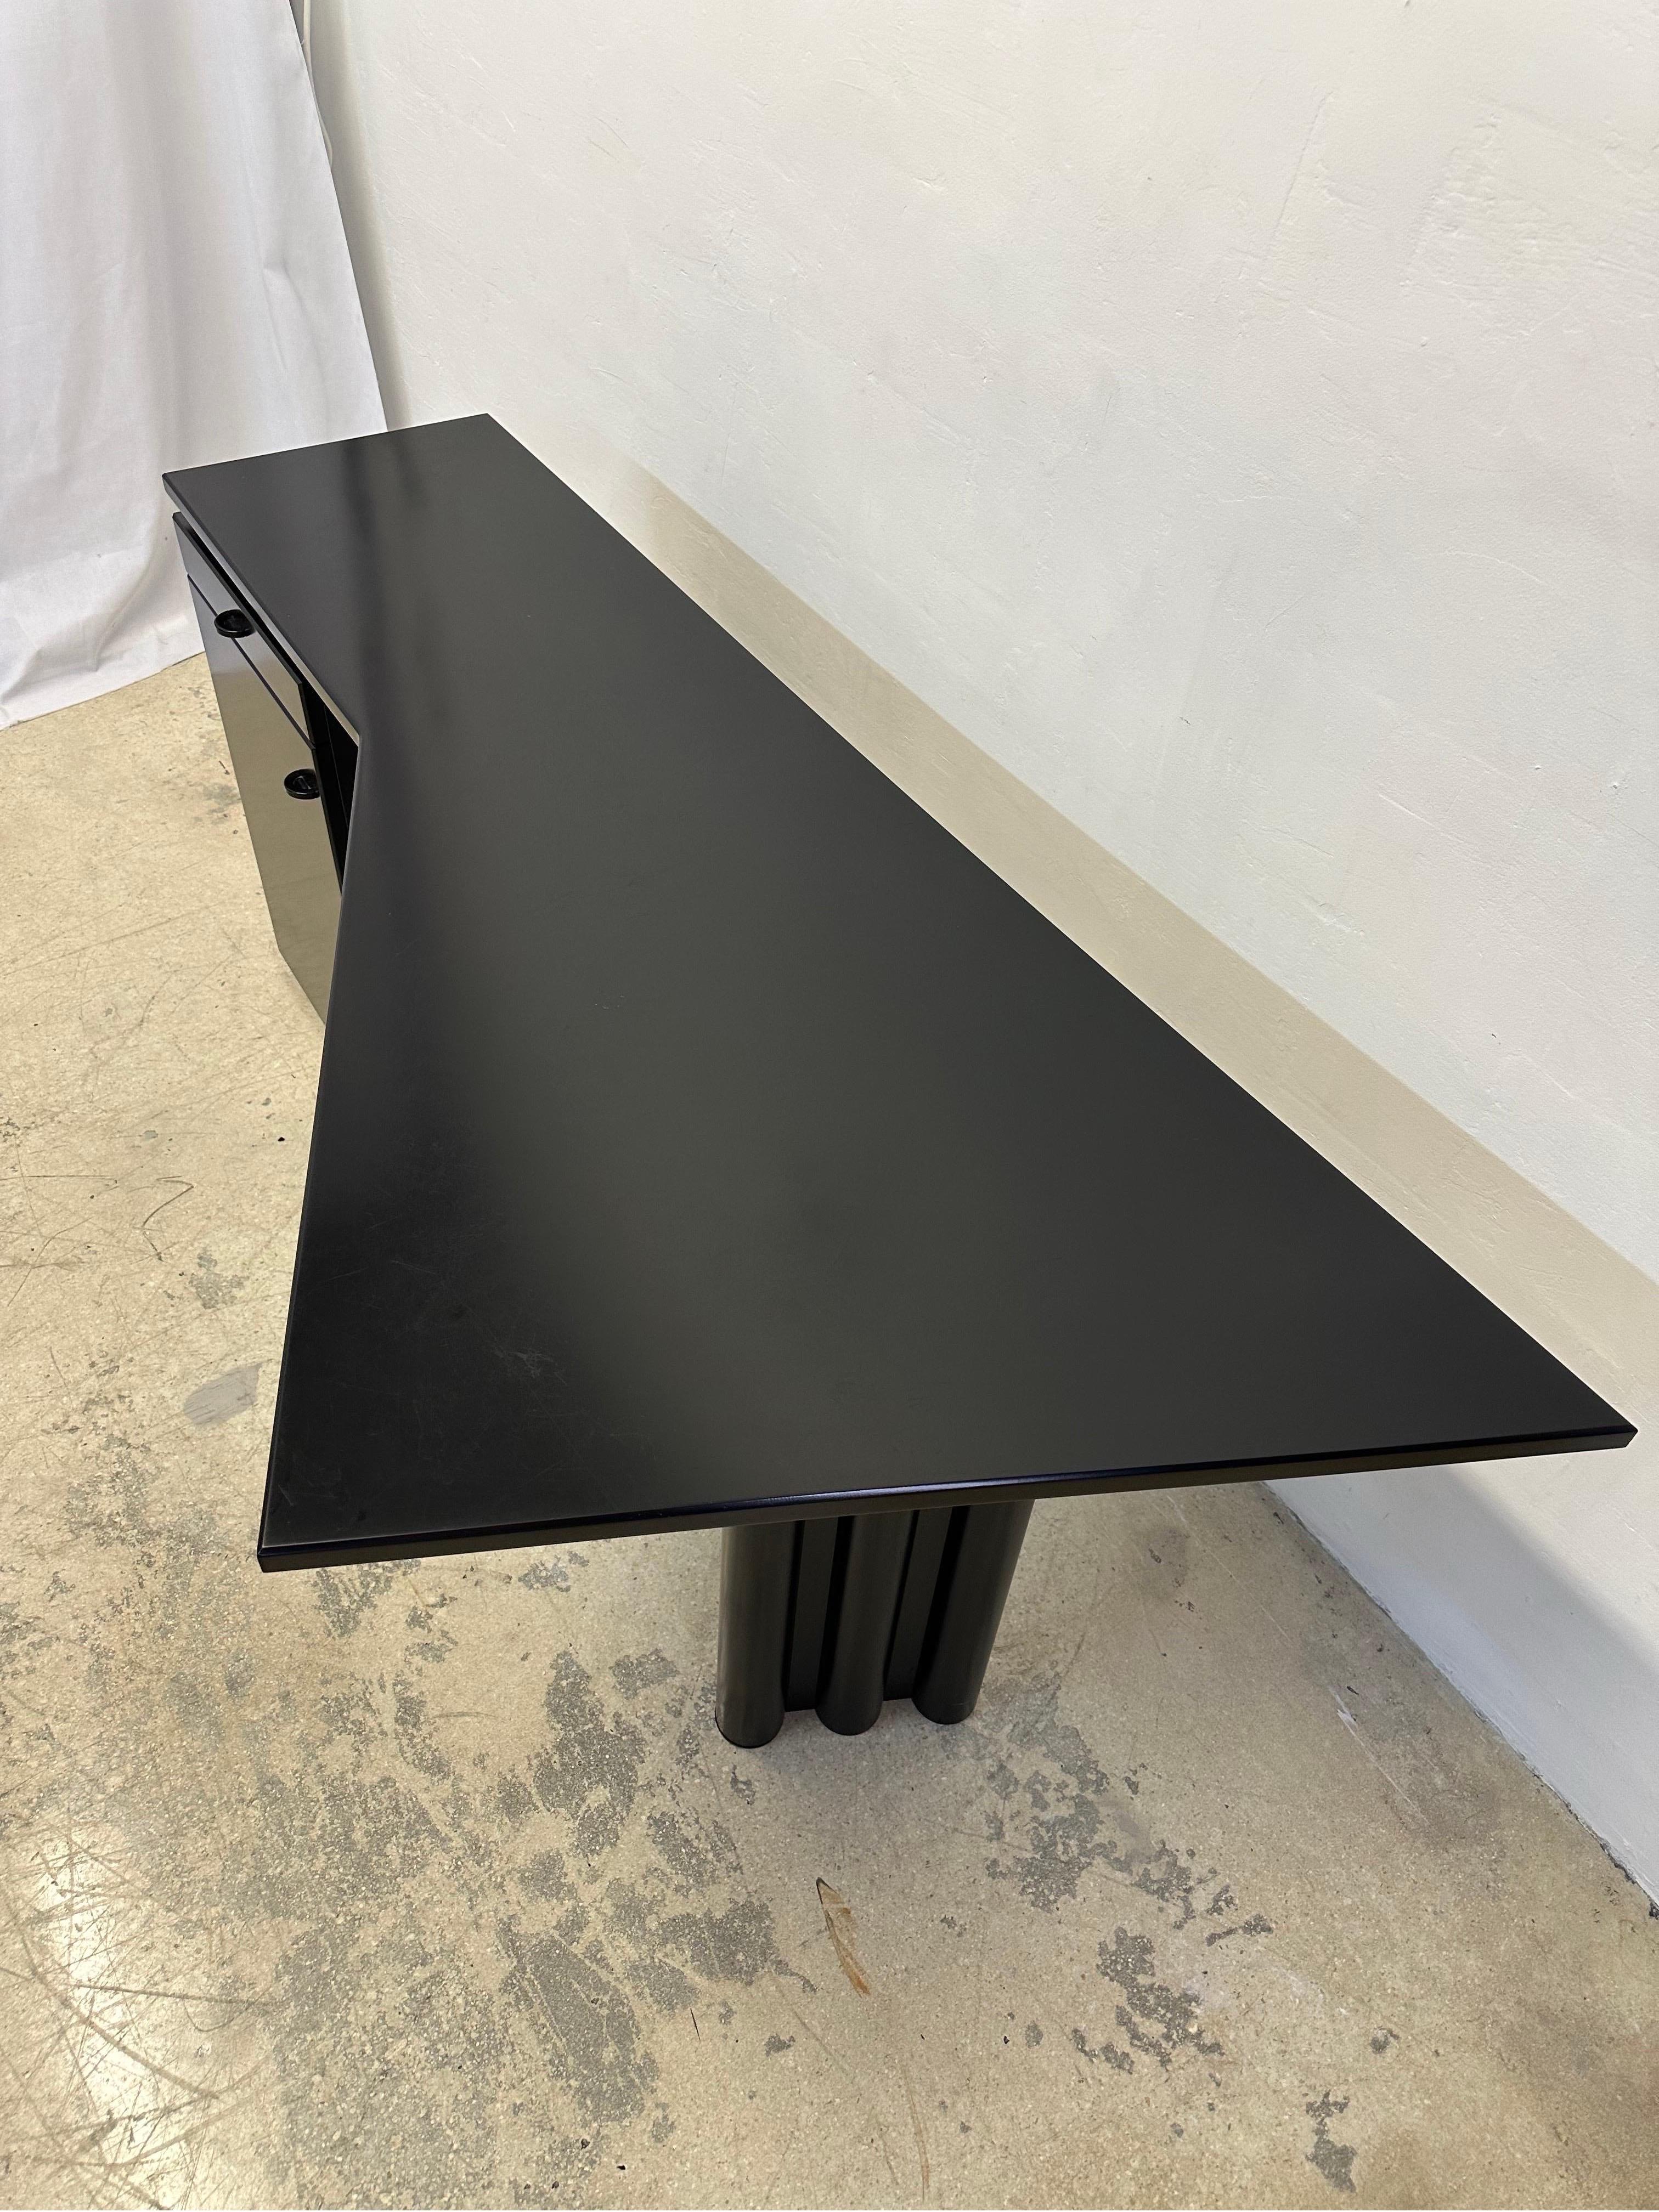 Postmodern Black Lacquered Desk by Interlubke, Germany 1980s For Sale 3